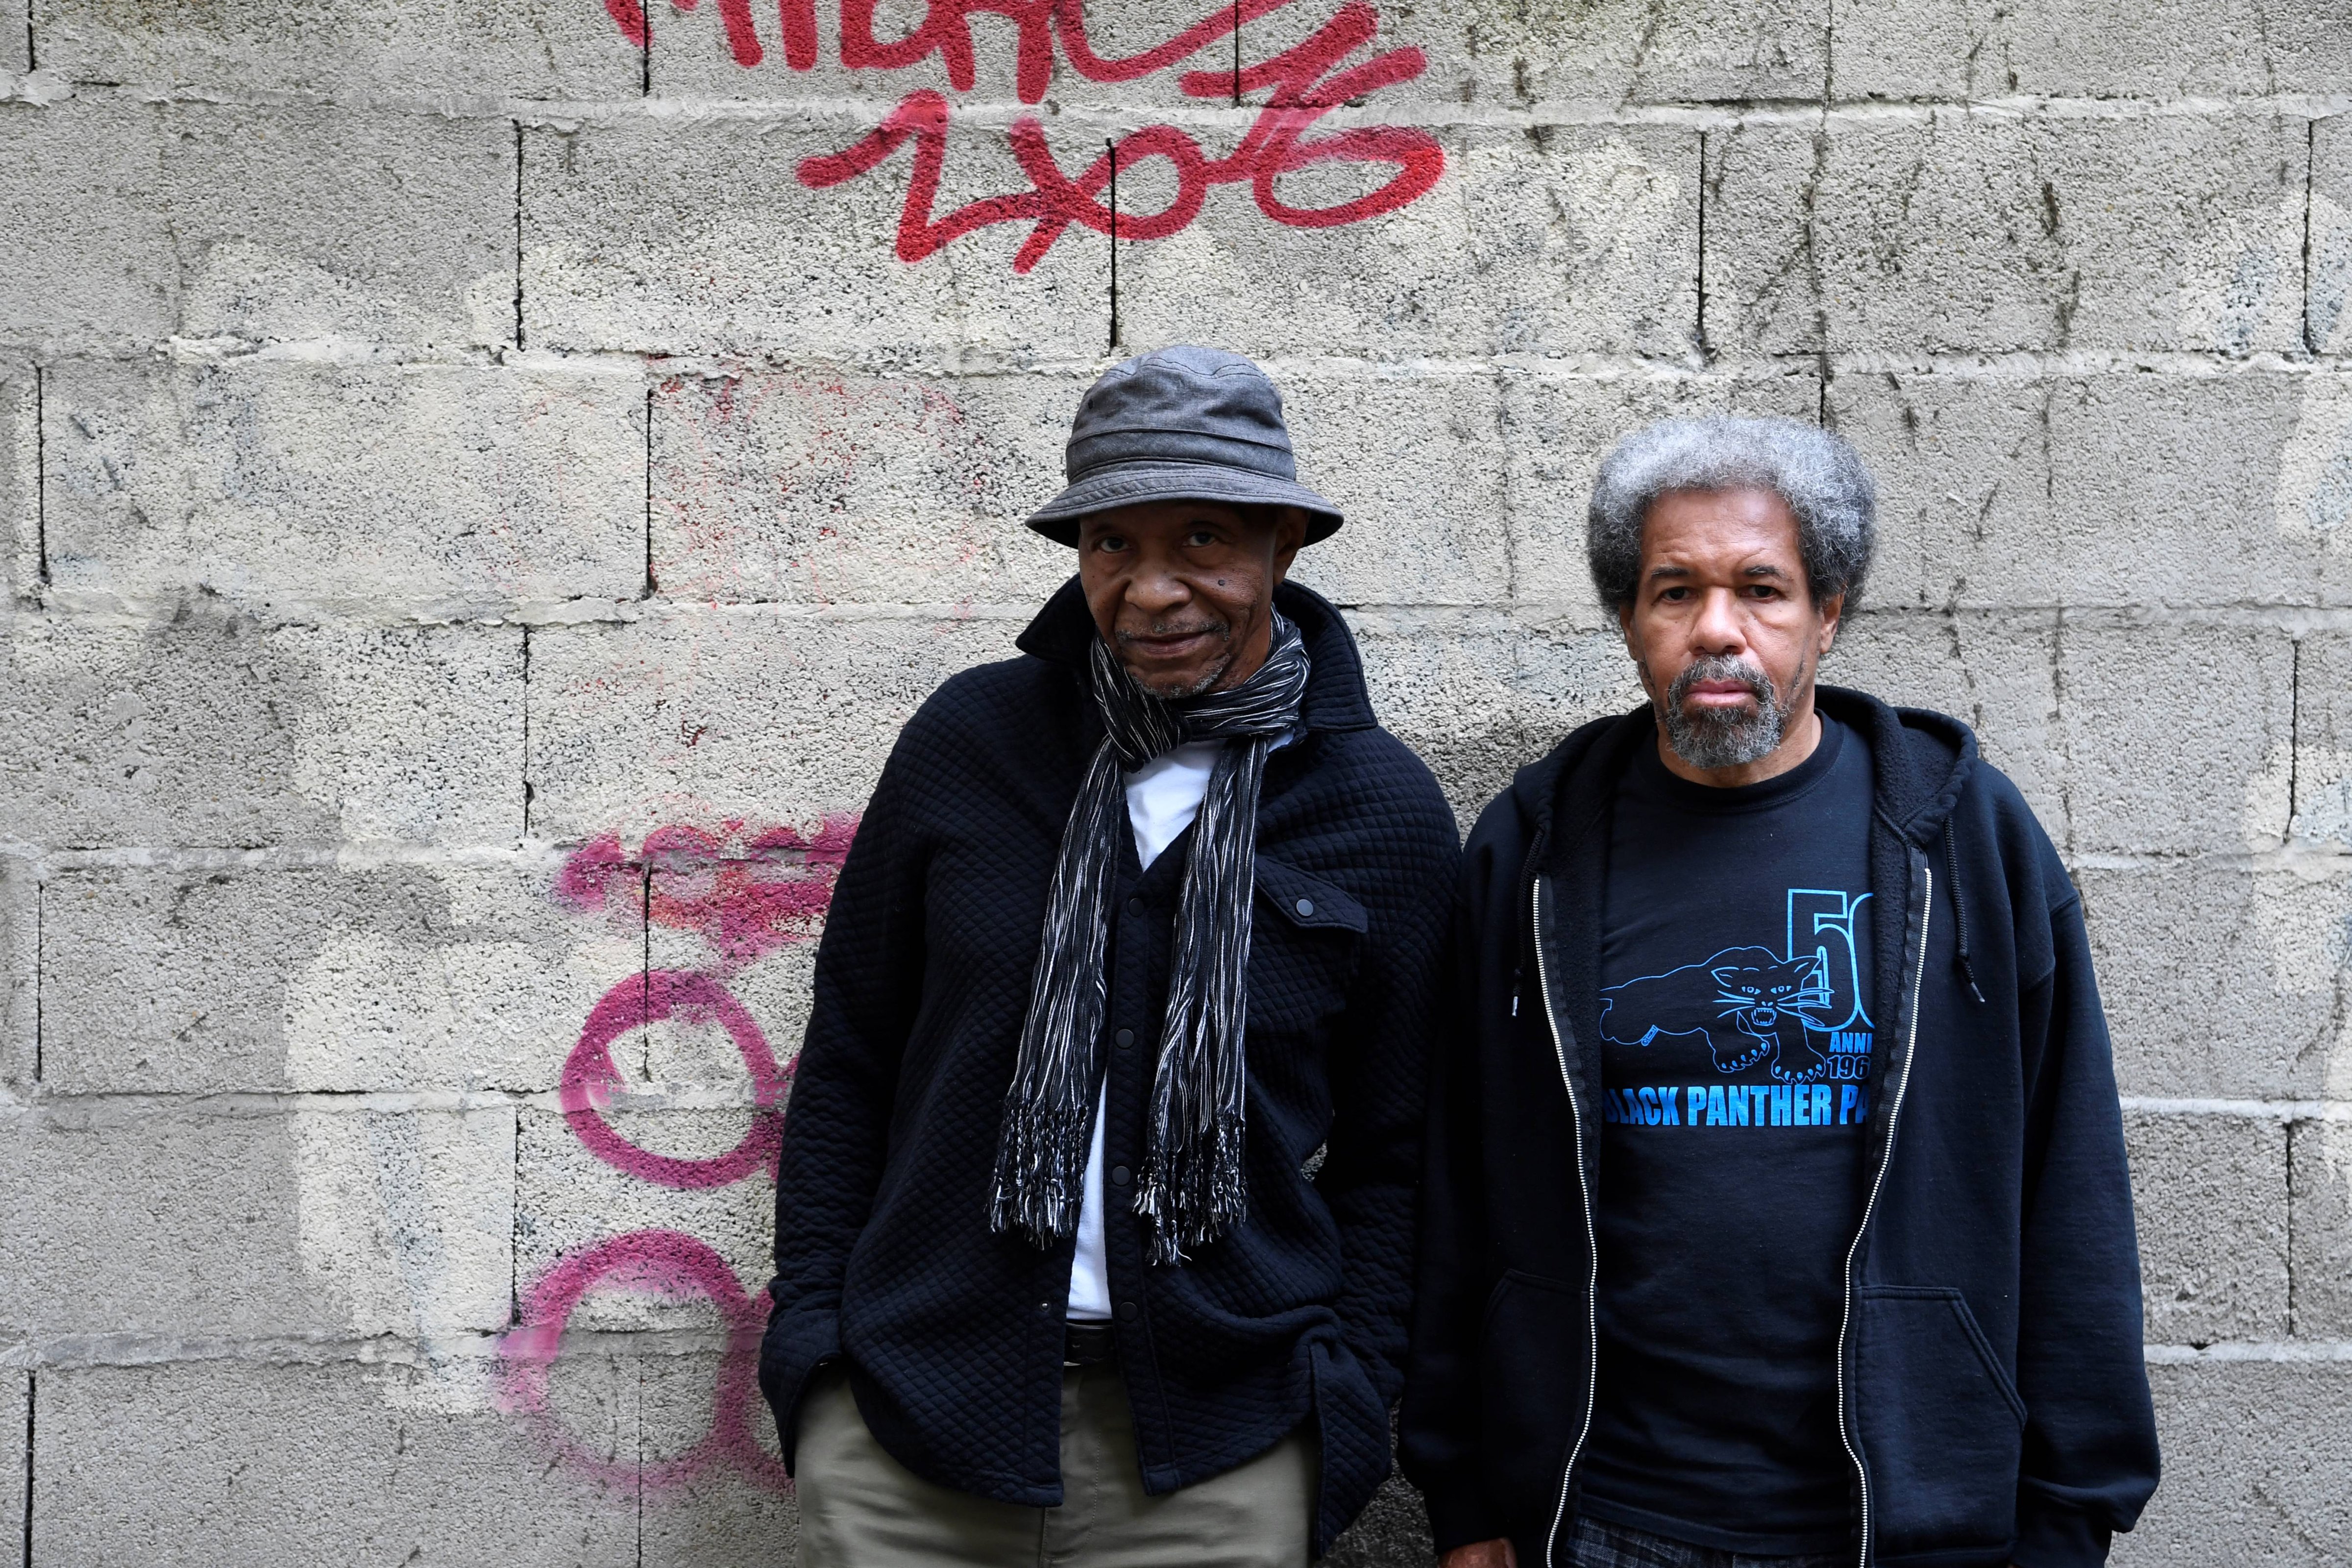 Former Louisiana State Penitentiary prisoners Robert King (R) and Albert Woodfox (L) pose prior to a press conference on Nov. 15, 2016 in Paris. (Alain Jocard—AFP/Getty Images)